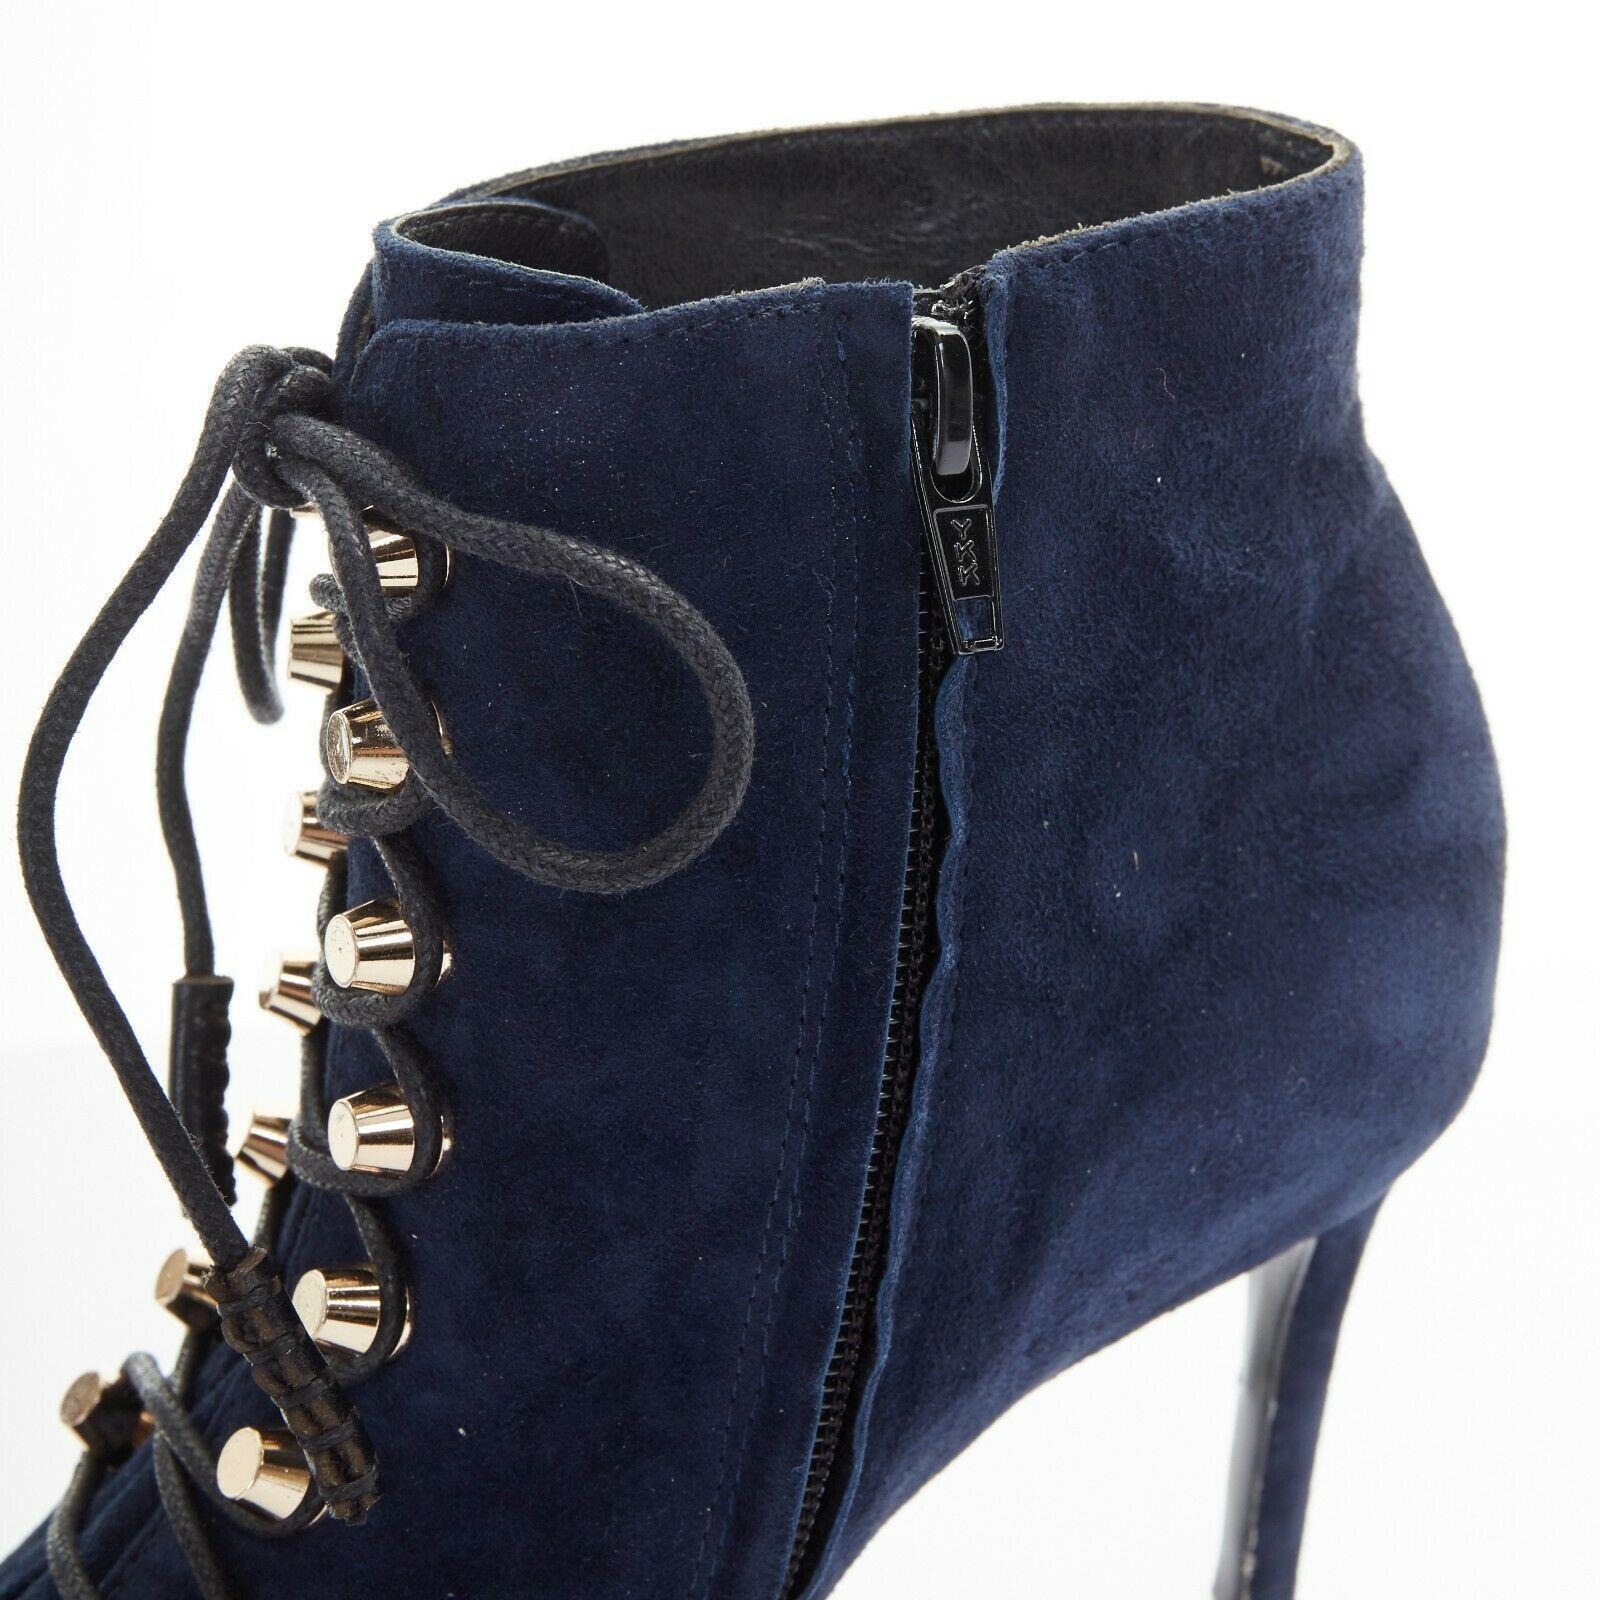 BALENCIAGA navy blue suede gold-tone stud lace up point toe ankle bootie EU37 1